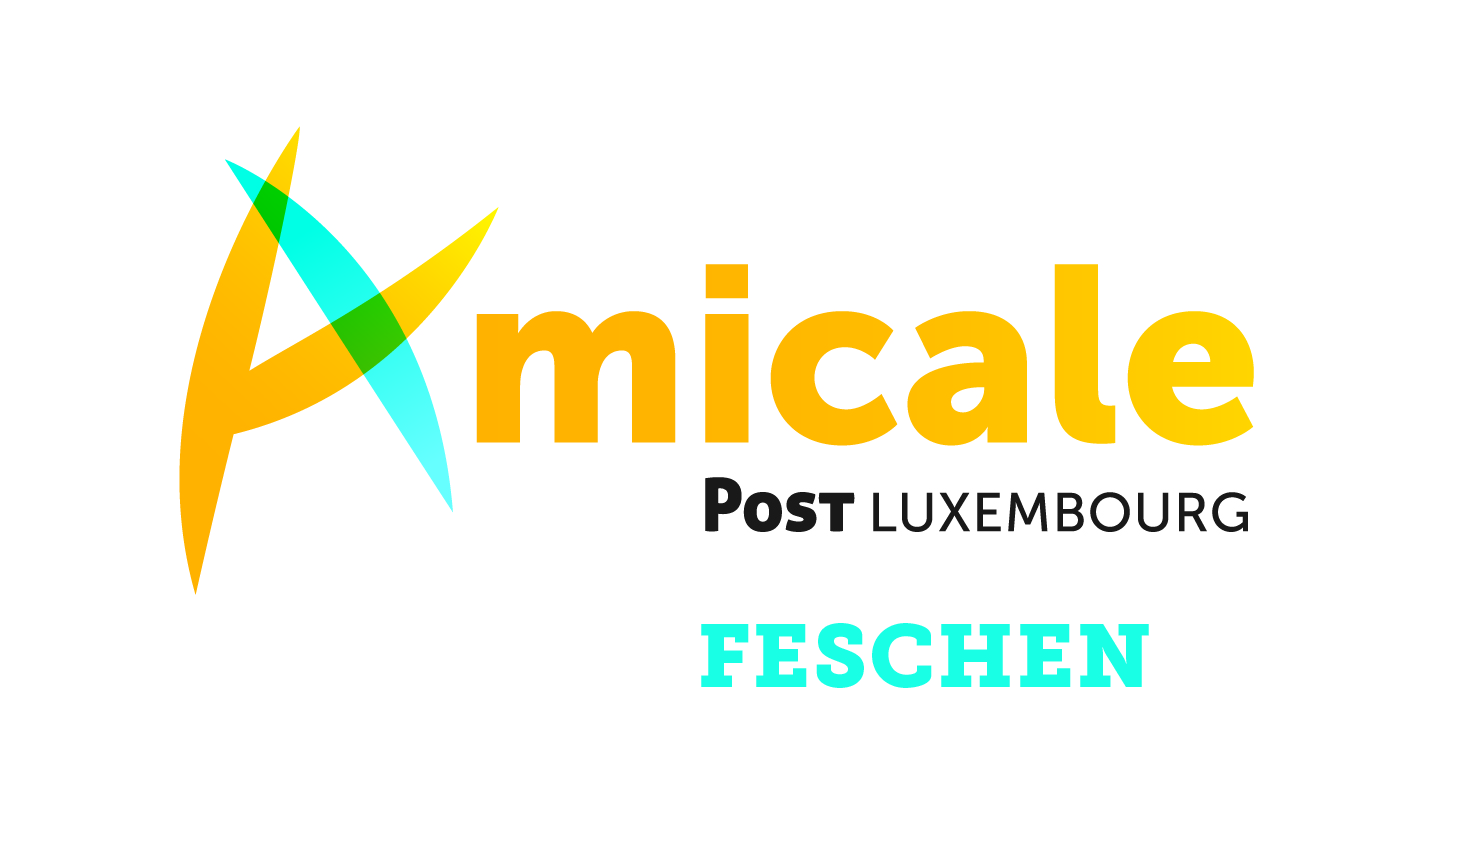 Amicale POST Luxembourg Feschen